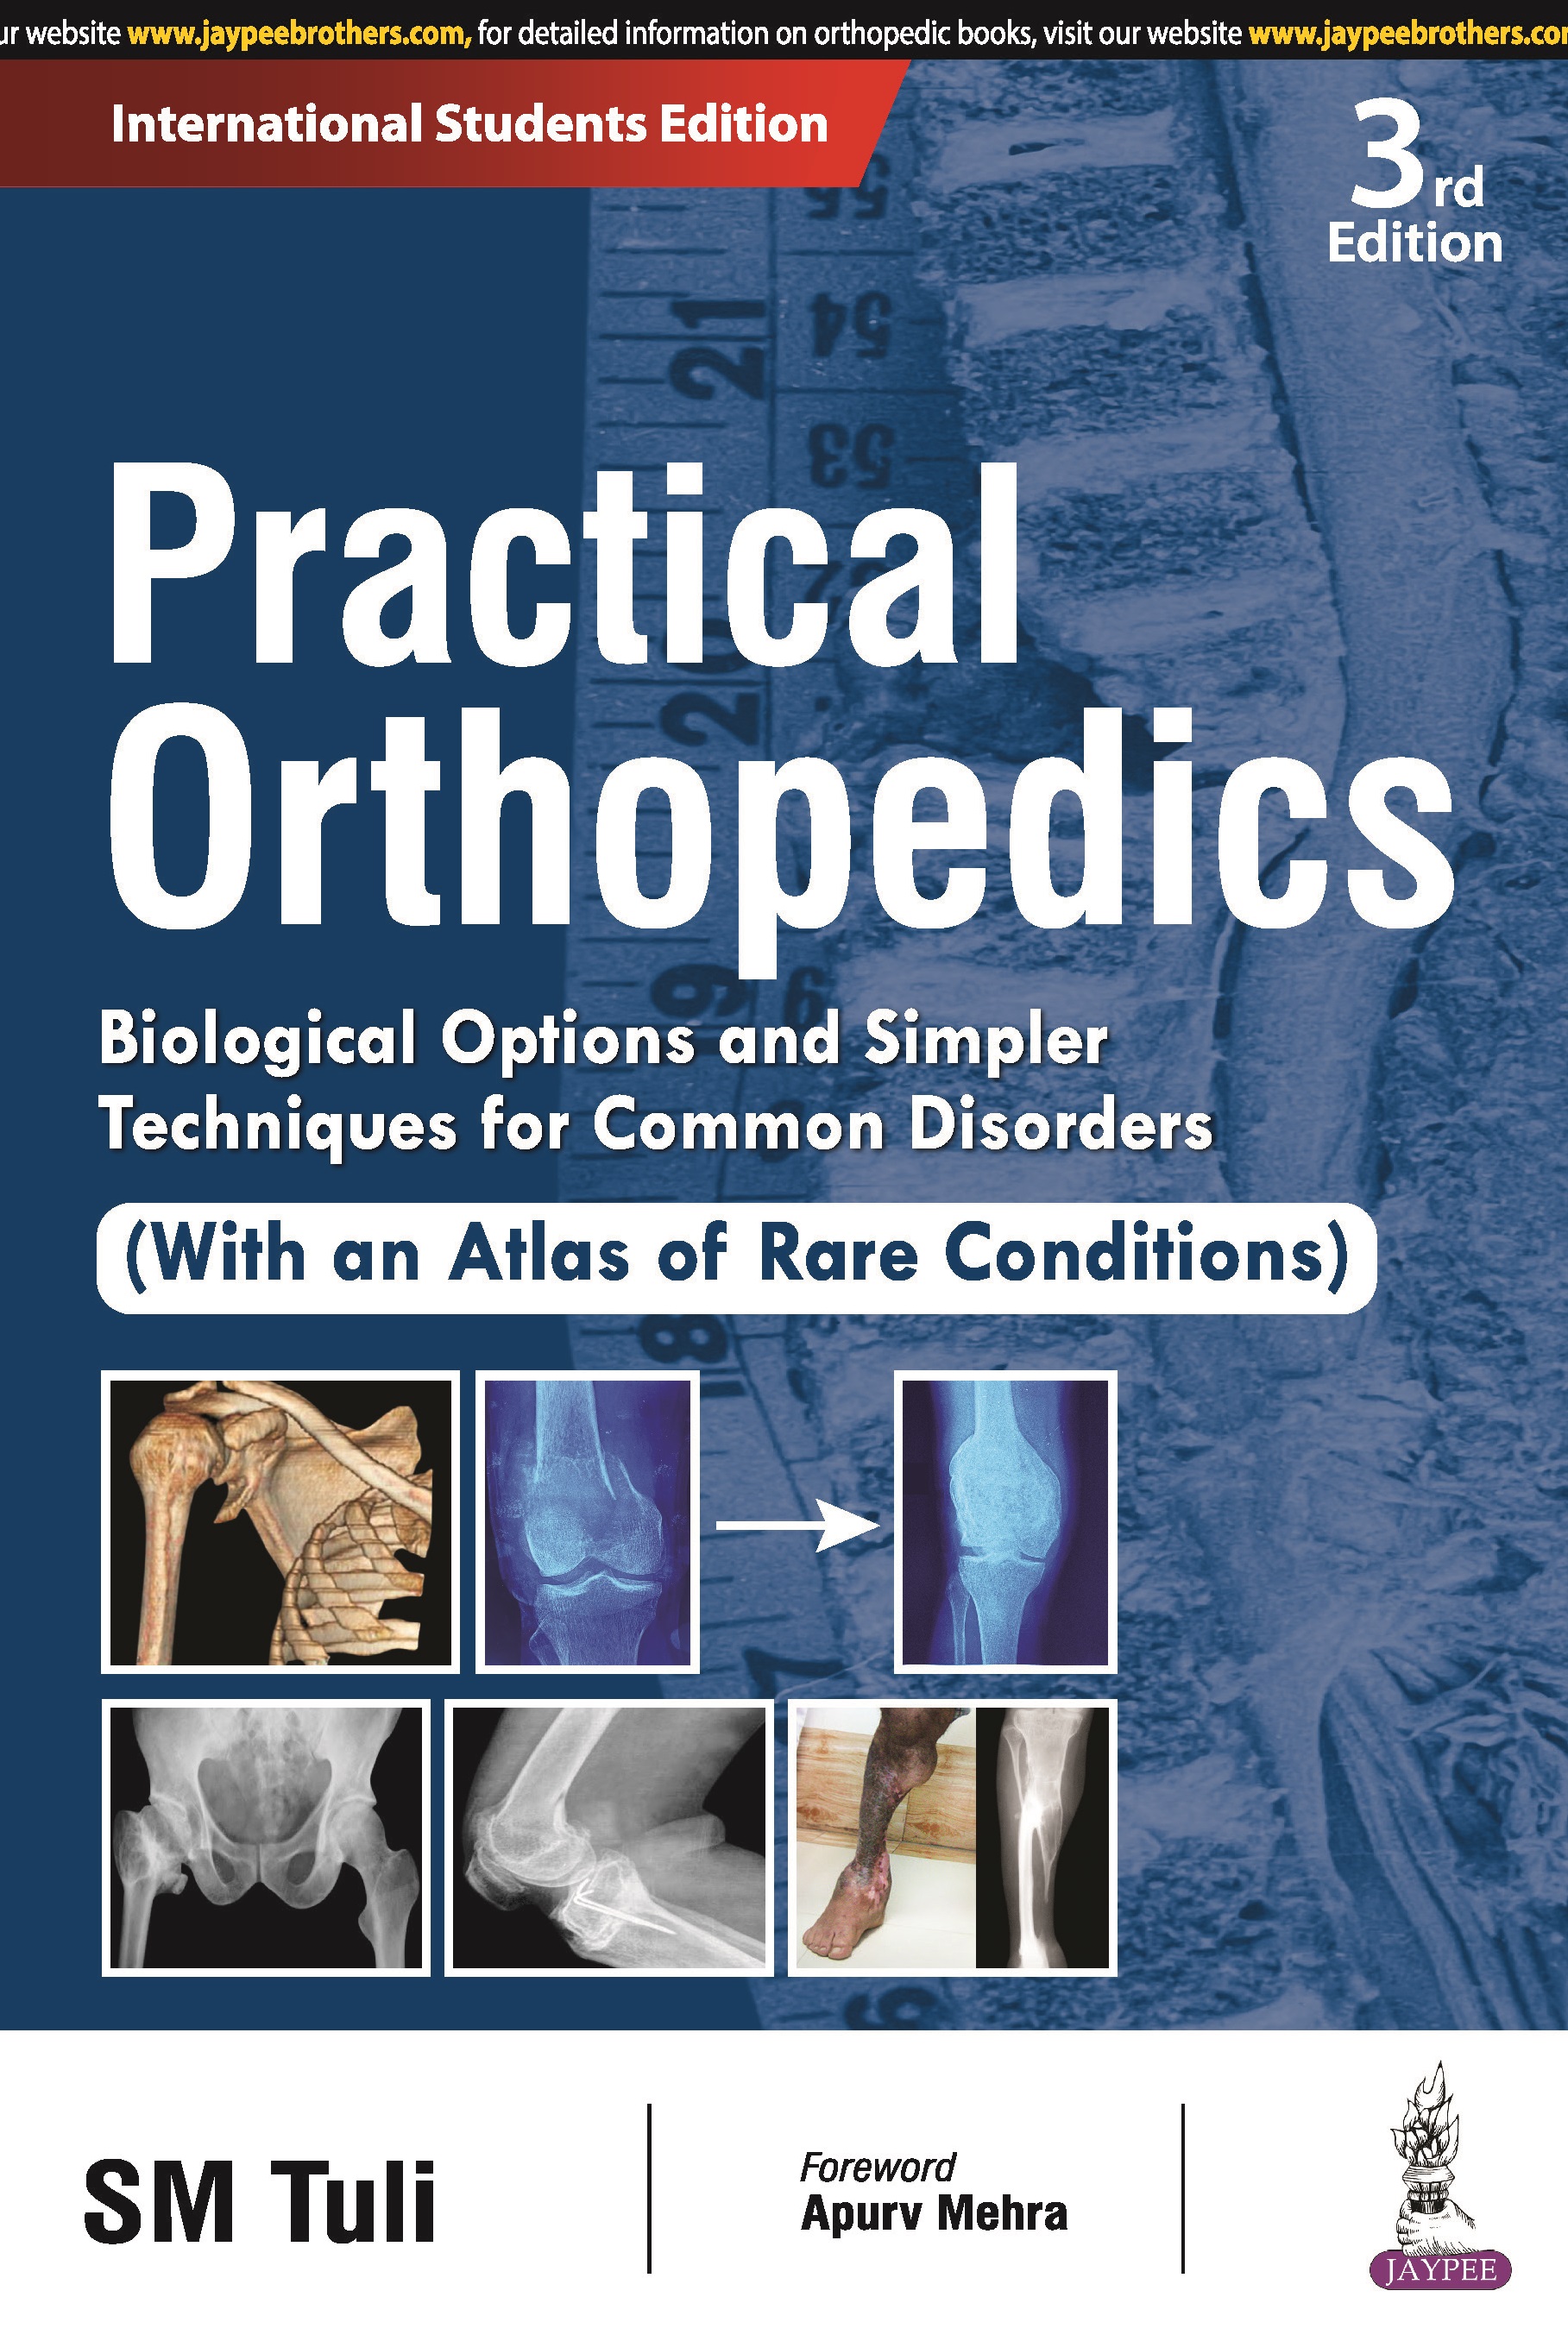 Practical Orthopedics: Biological Options and Simpler Techniques for Common Disorders (With an Atlas of Rare Conditions)